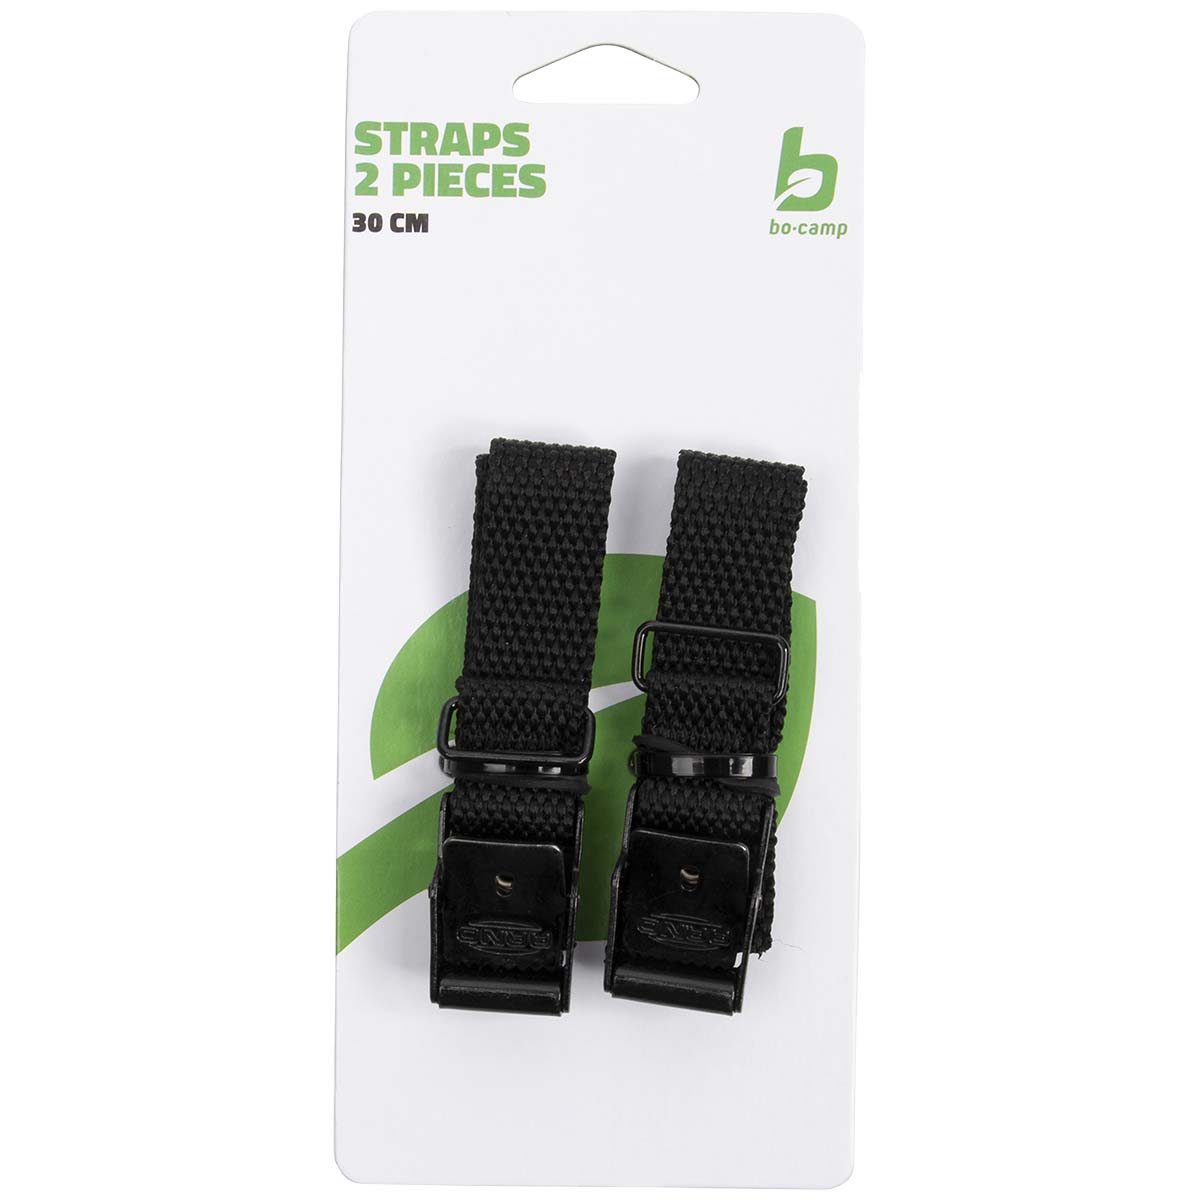 5410150 A universal tie strap of the highest quality. This multifunctional tie strap can be tied to almost anything. Equipped with an extra sturdy galvanized steel buckle. Packed in units of 2.